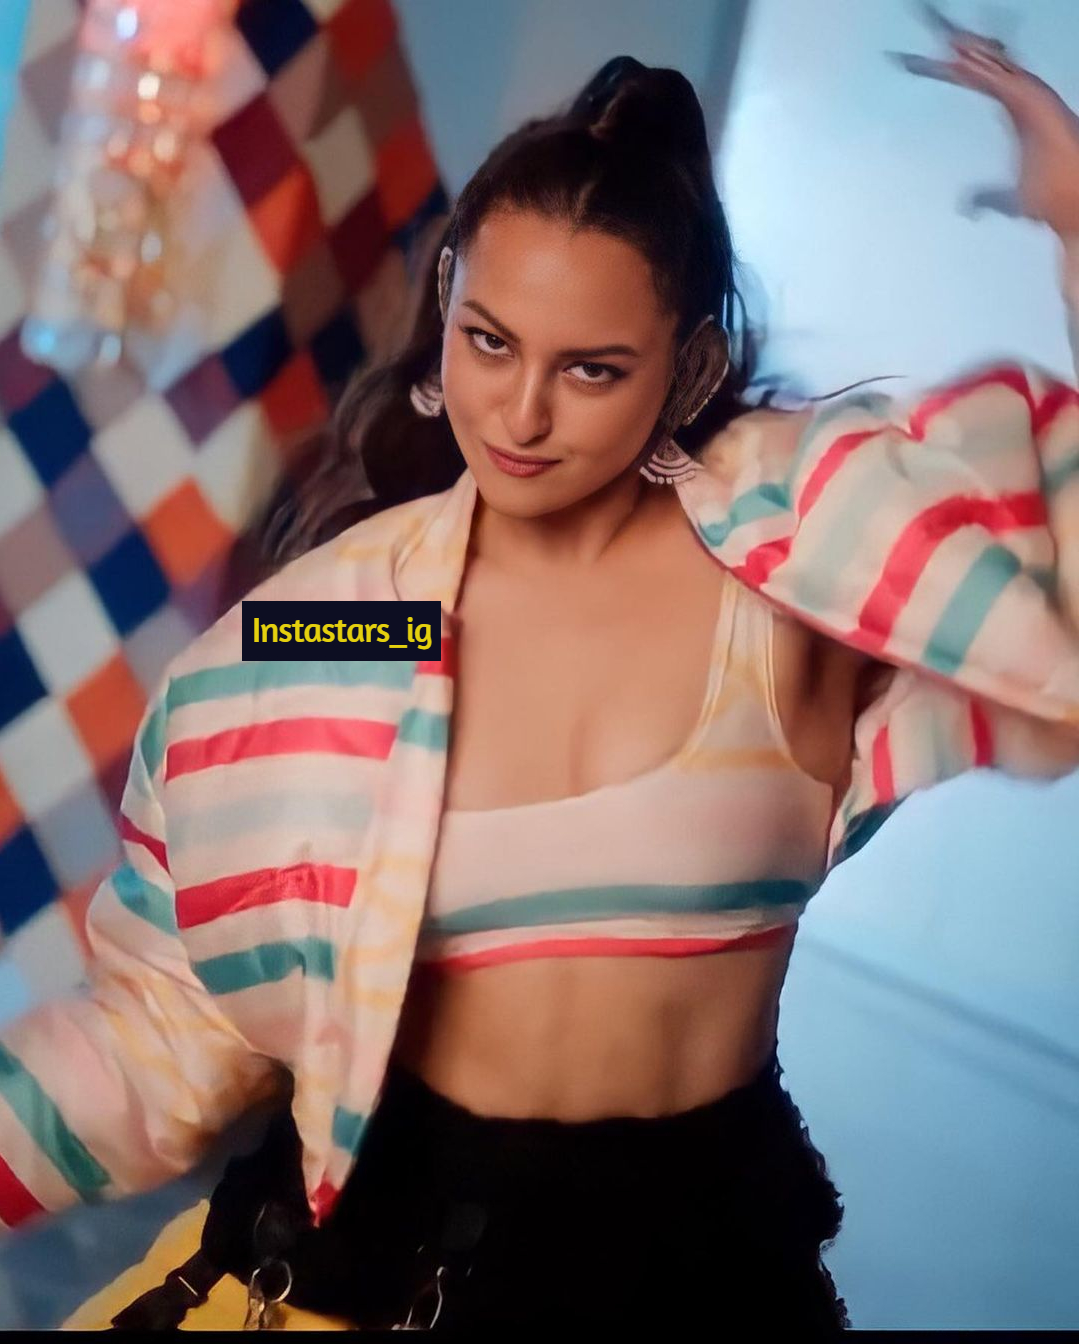 Mil Mahiya Actress Aka Sonakshi Sinha's Hot and Sexy Pictures In Bra - Insta Stars